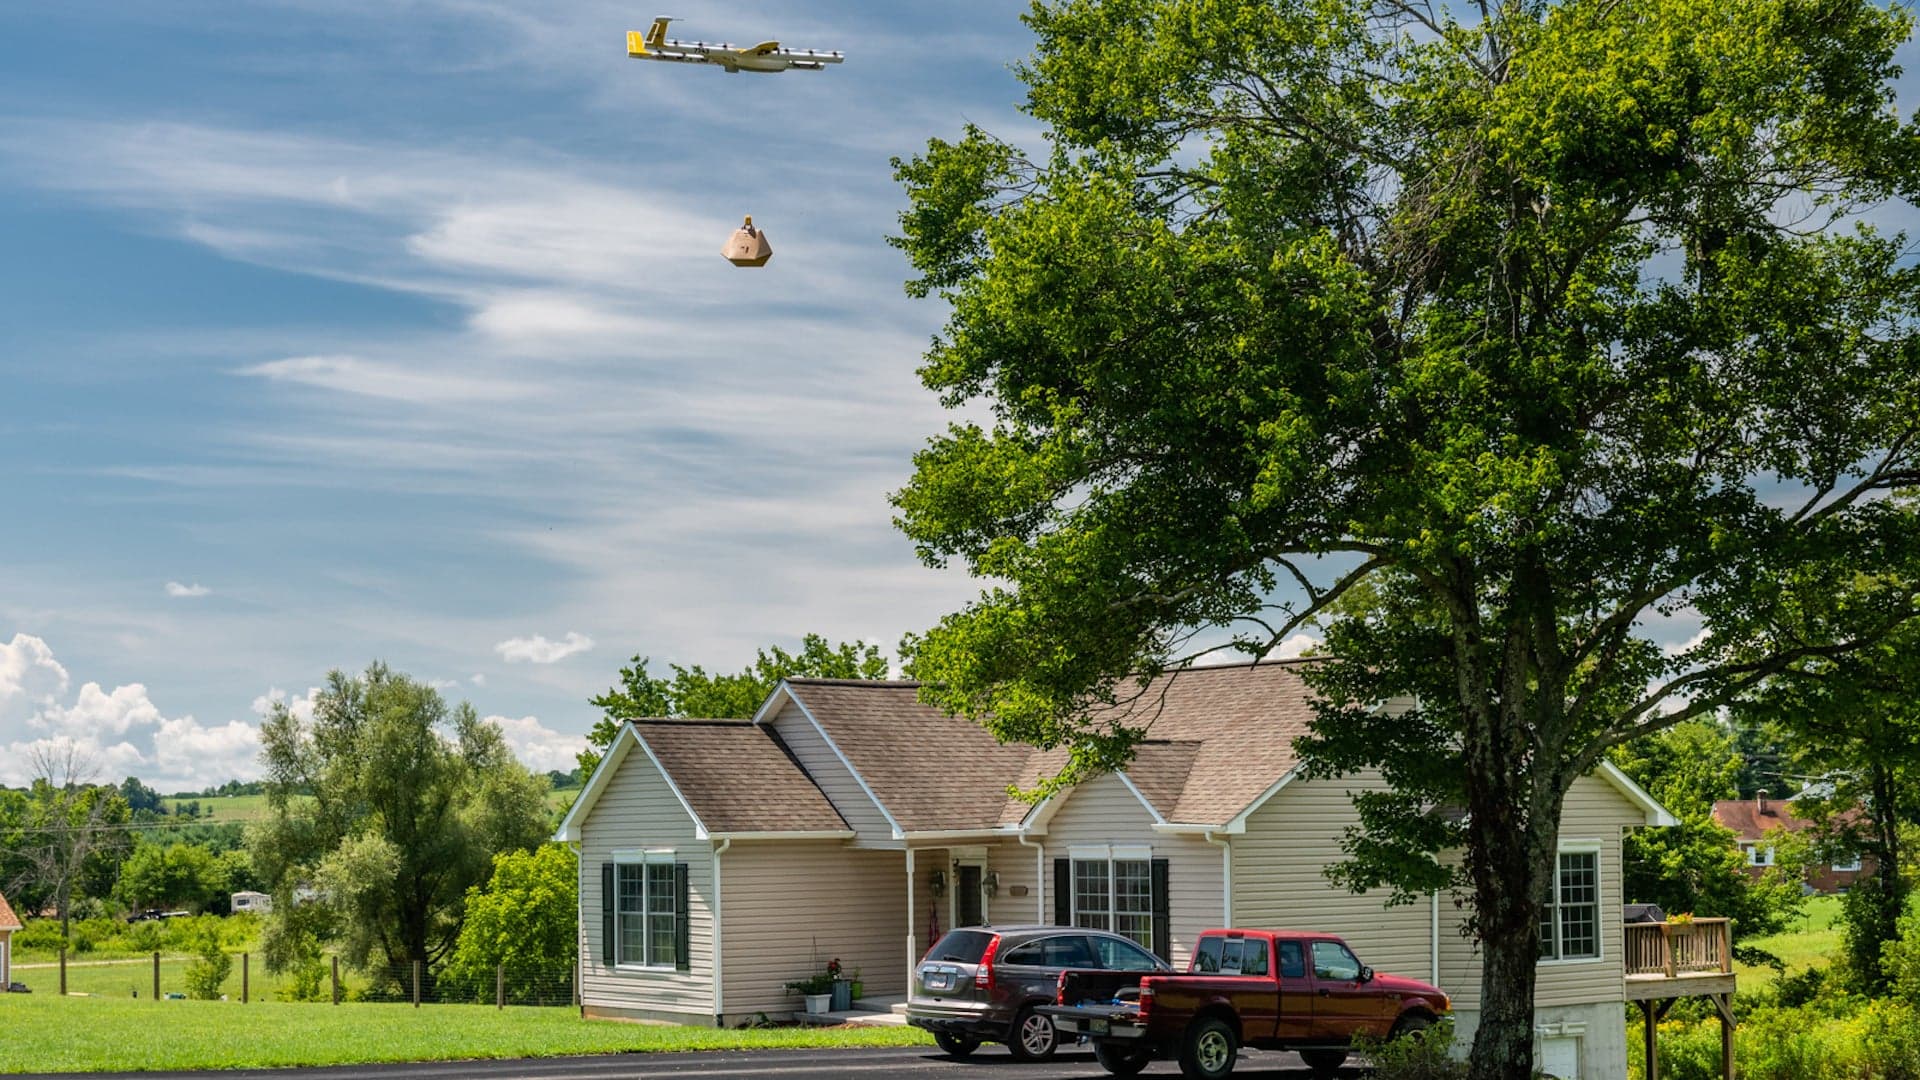 Project Wing Completes First Long-Distance, Residential Drone Delivery in US